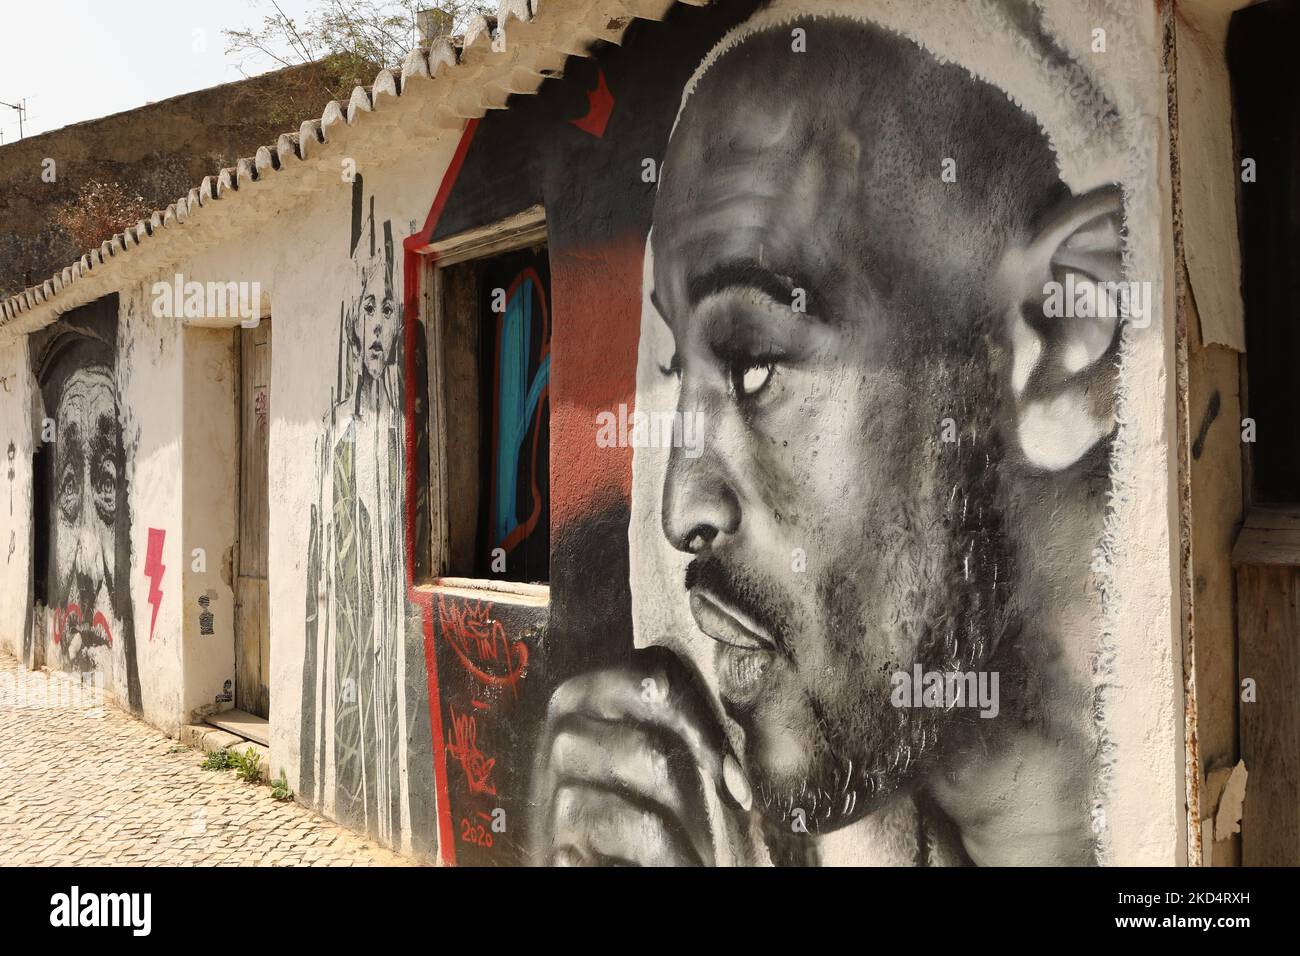 Street Art. A mural of an African man in old town Lagos, Algarve, Portugal Stock Photo